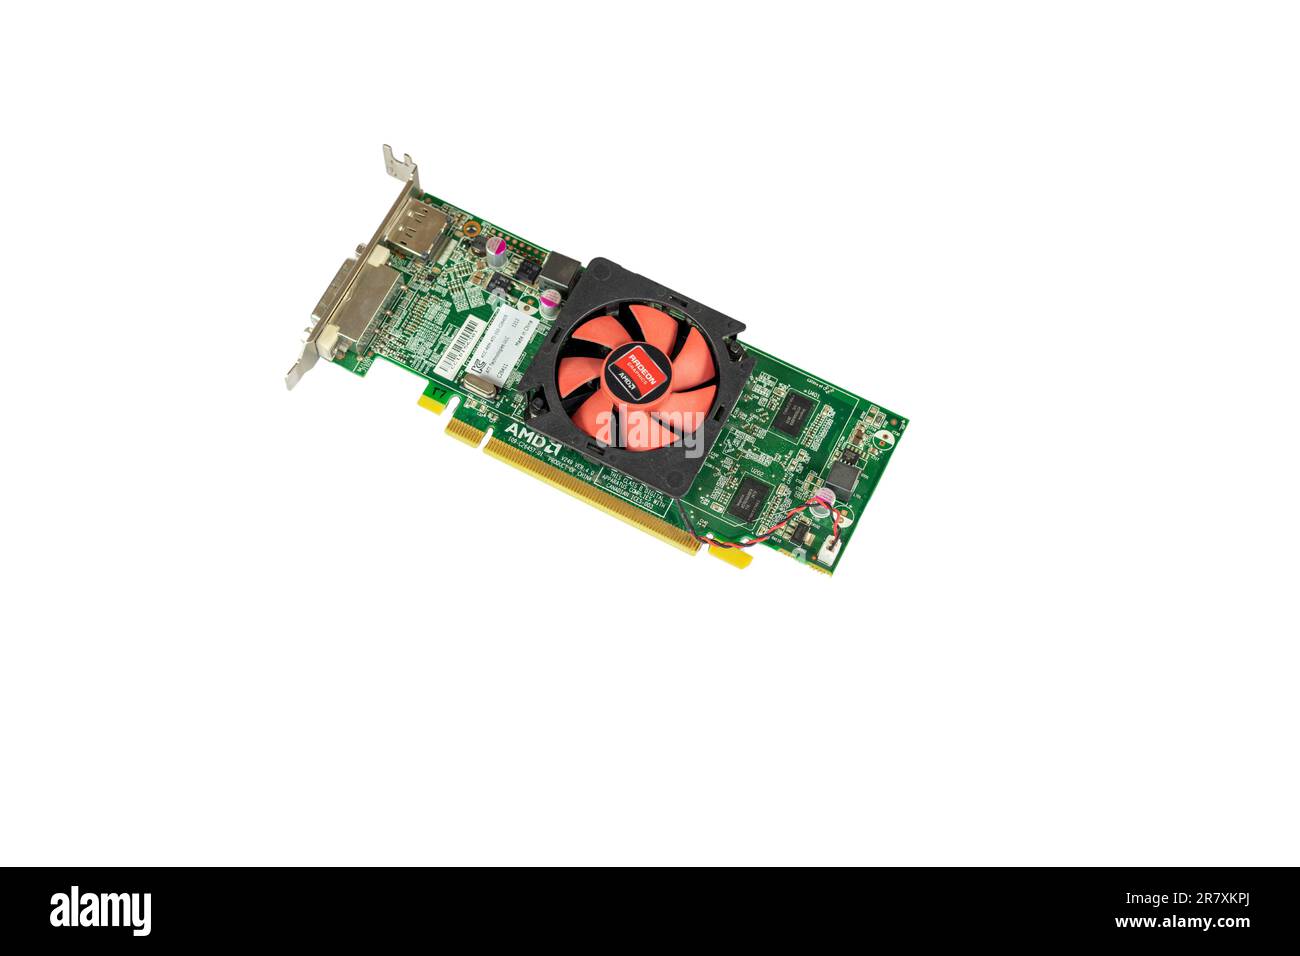 Computer graphic card on white background closeup: Swat, Pakistan - May 26, 2023. Stock Photo